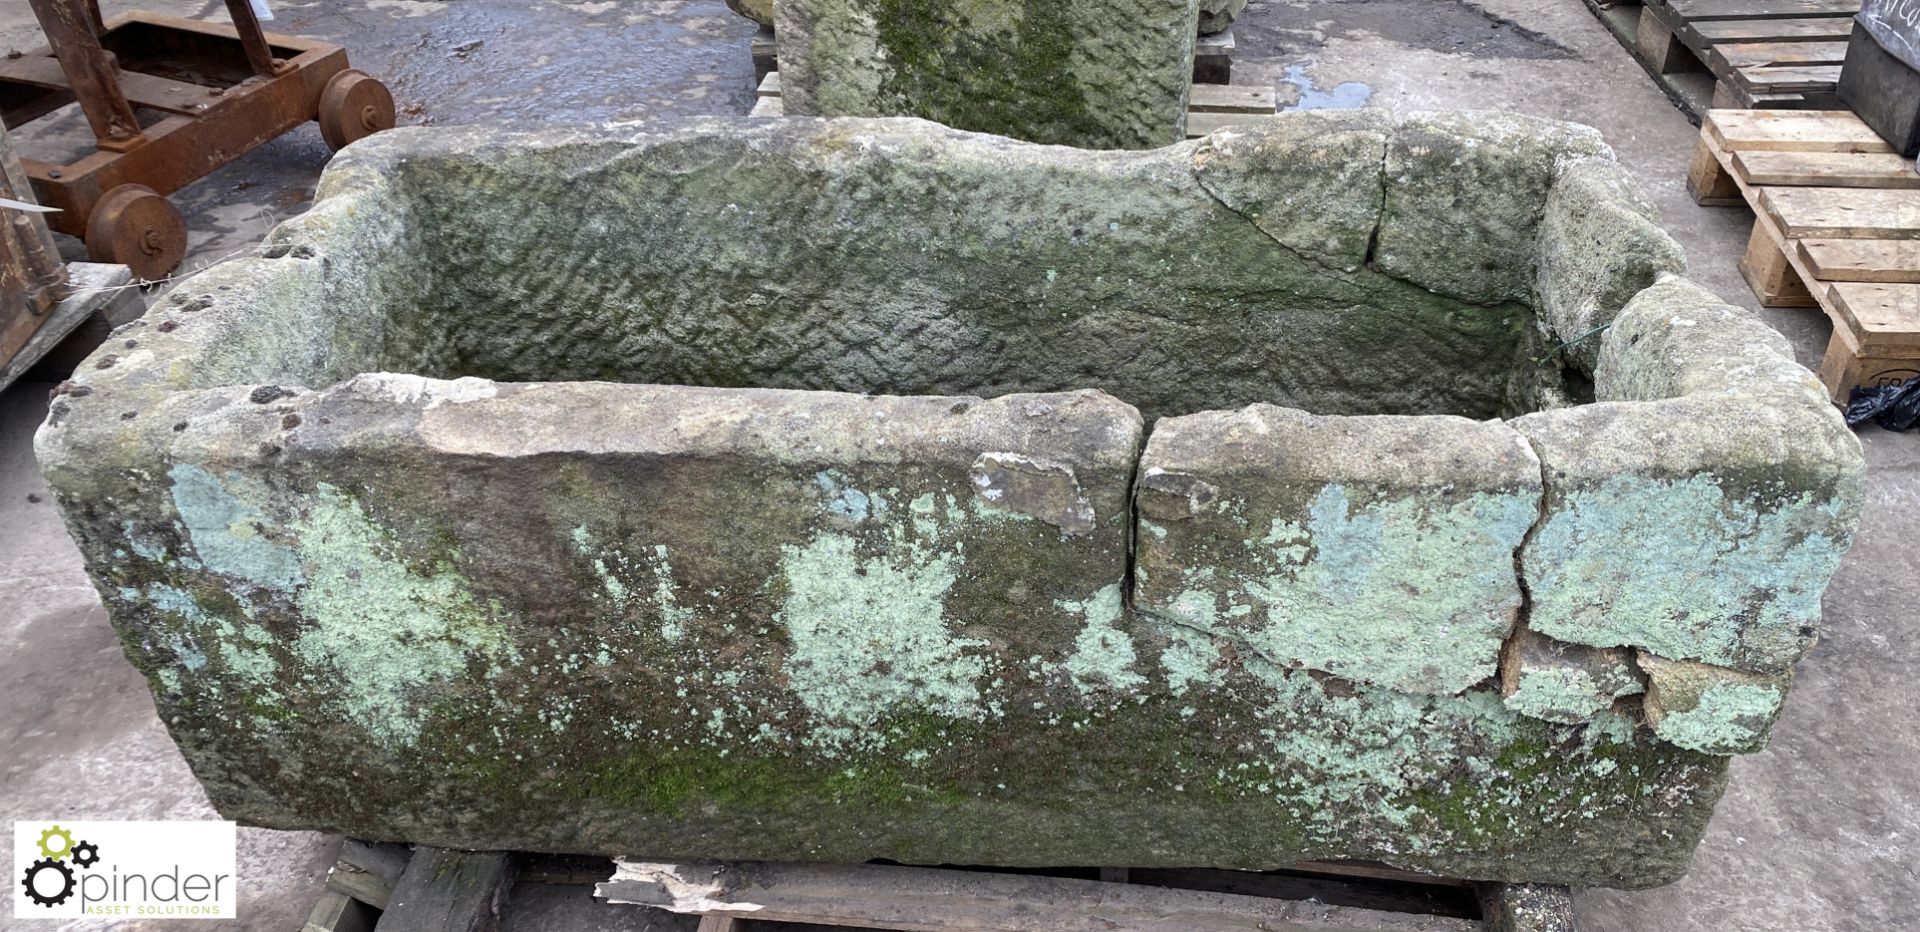 Yorkshire stone Trough, 1450mm x 700mm x 530mm - Image 2 of 7